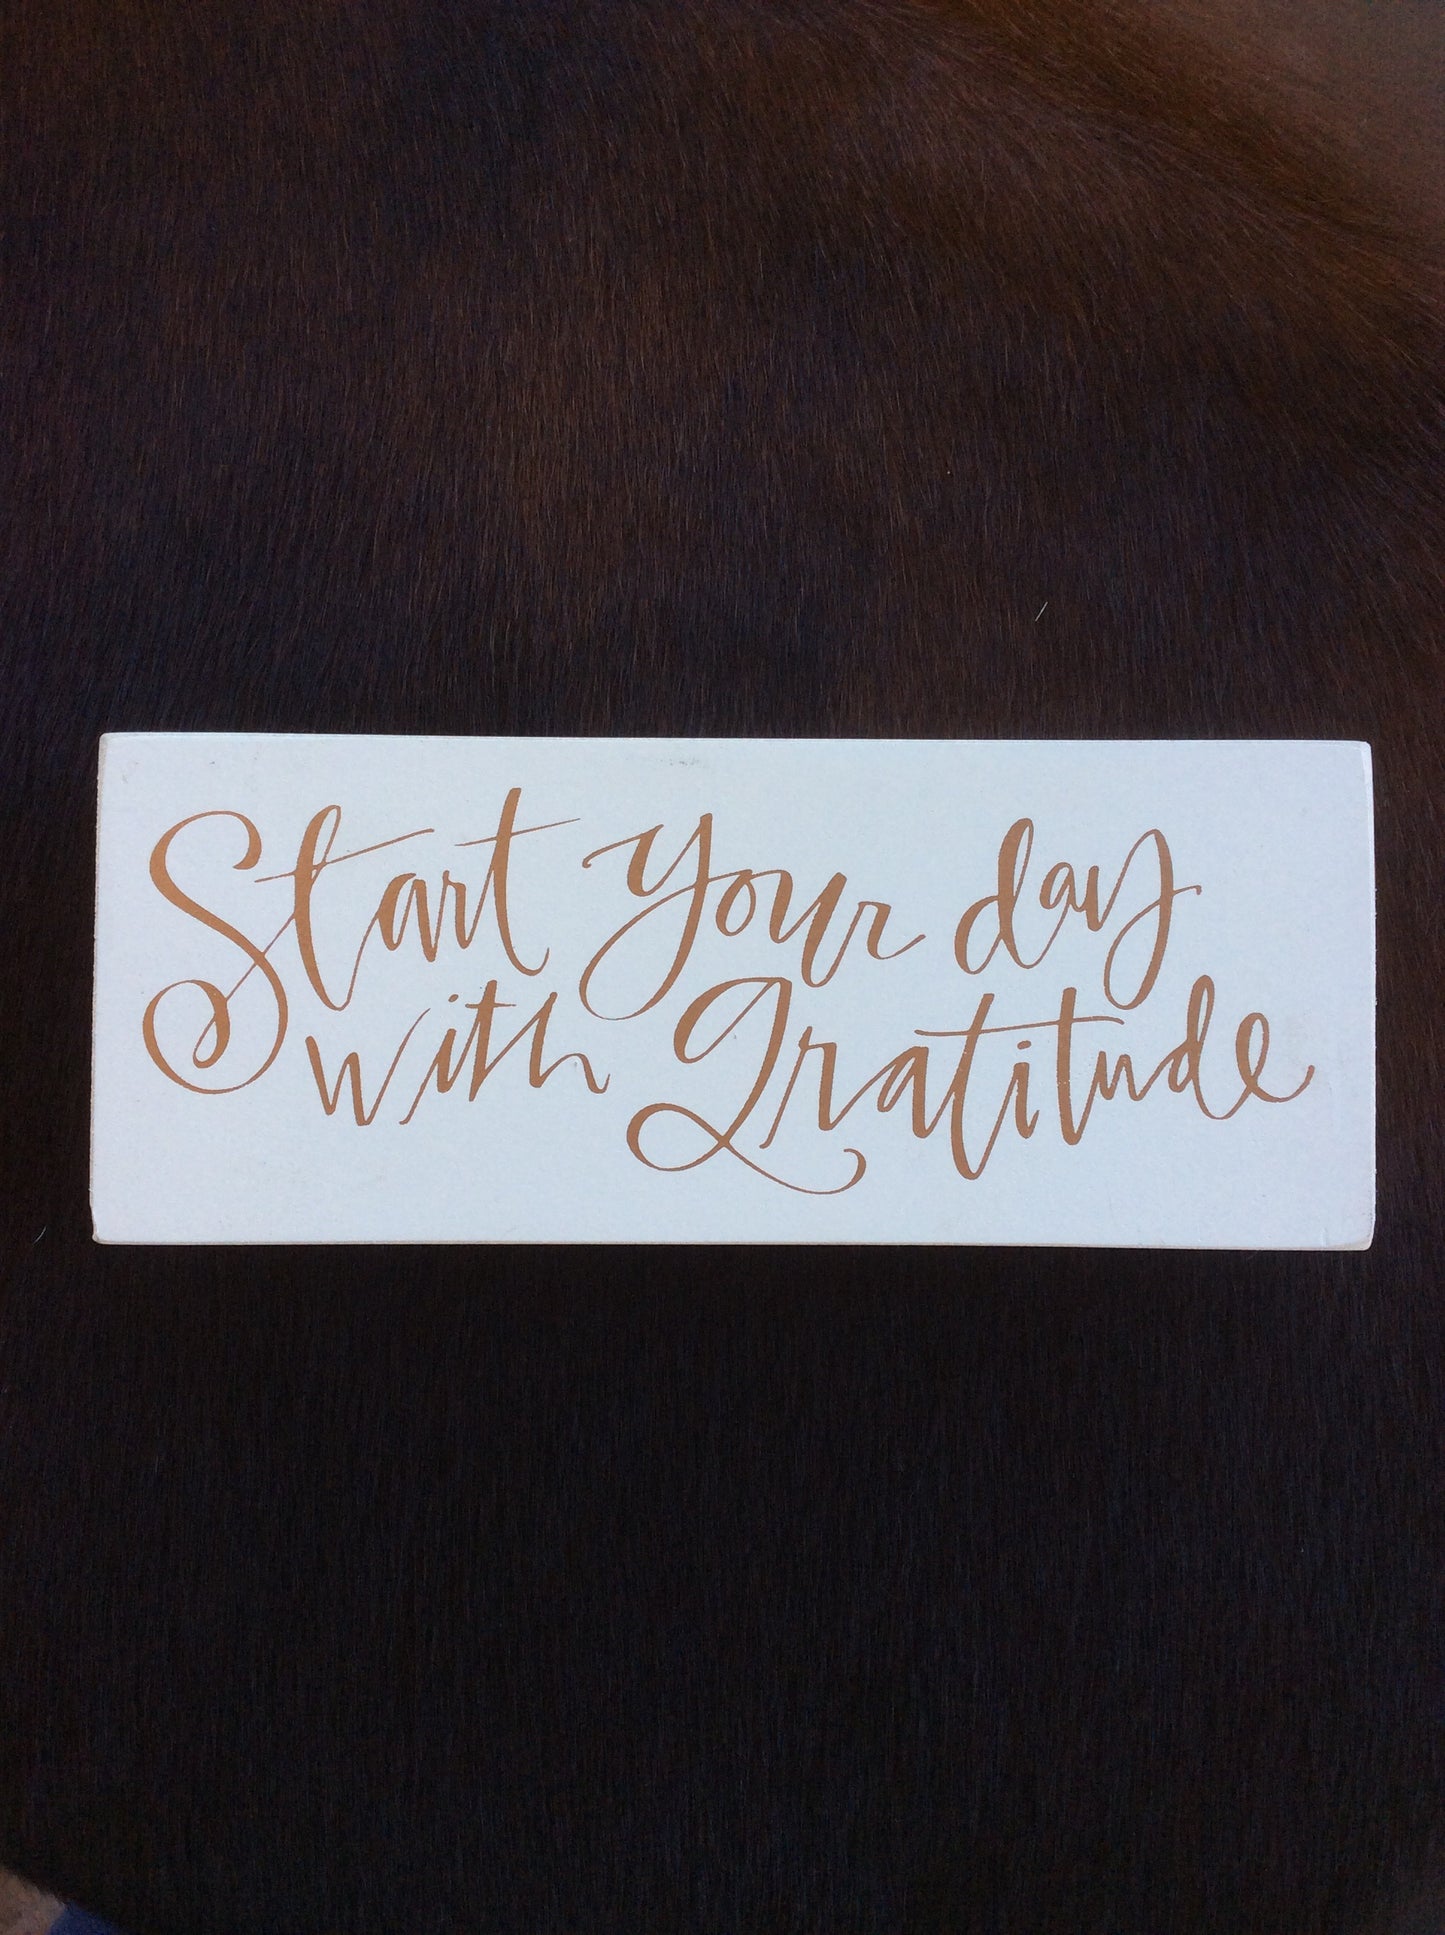 "START YOUR DAY WITH GRATITUDE" BOX SIGN